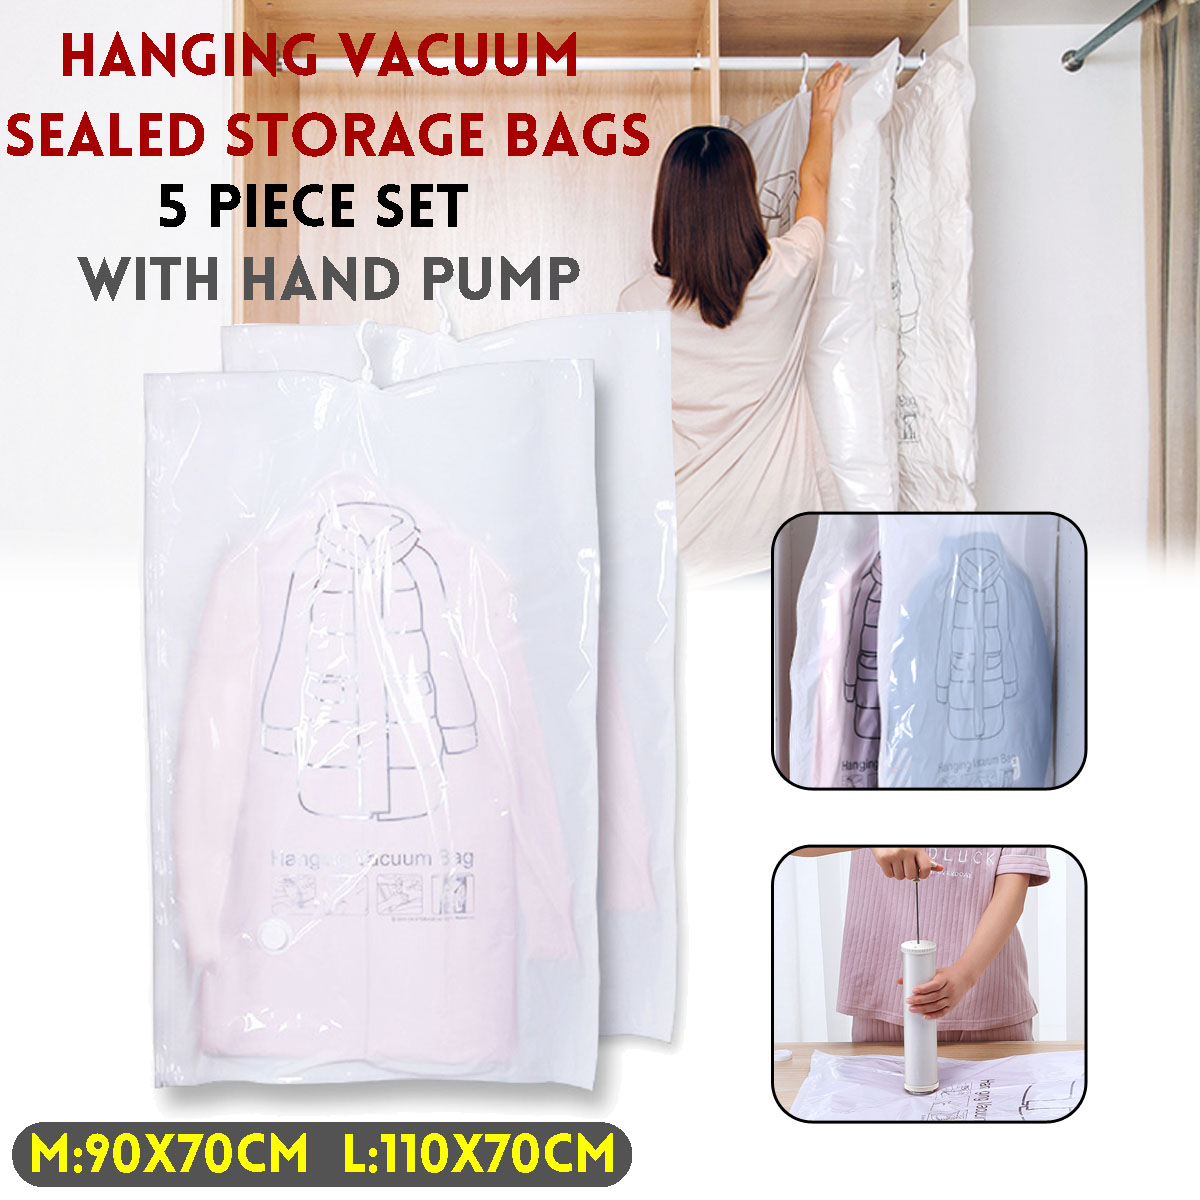 5Pcs-Hanging-Vacuum-Sealed-Cloth-Hanger-Storage-Bags-With-Hand-Pump-1675953-1